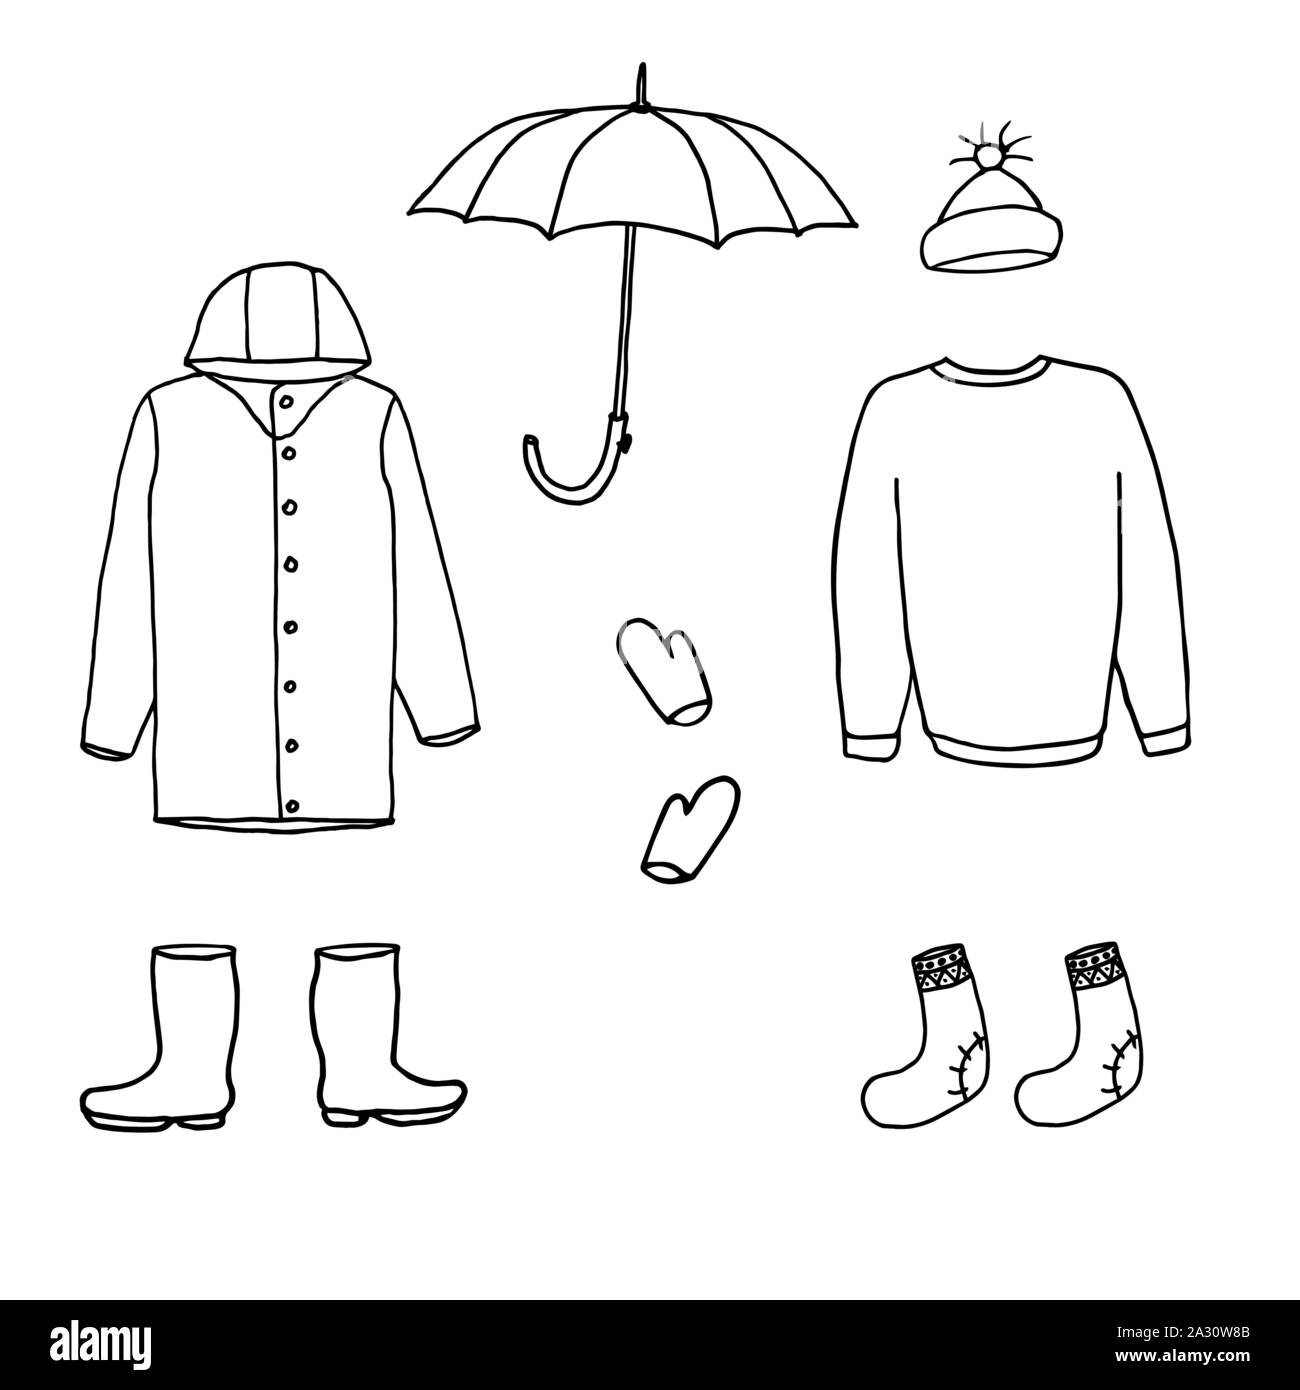 Clothes and accessories for cold season: raincoat, boots, umbrella, cap, sweater, socks, gloves. Cartoon doodle sketch can be used in cards, posters, flyers, banners, logo, clothes design etc. Vector illustration EPS10 Stock Vector